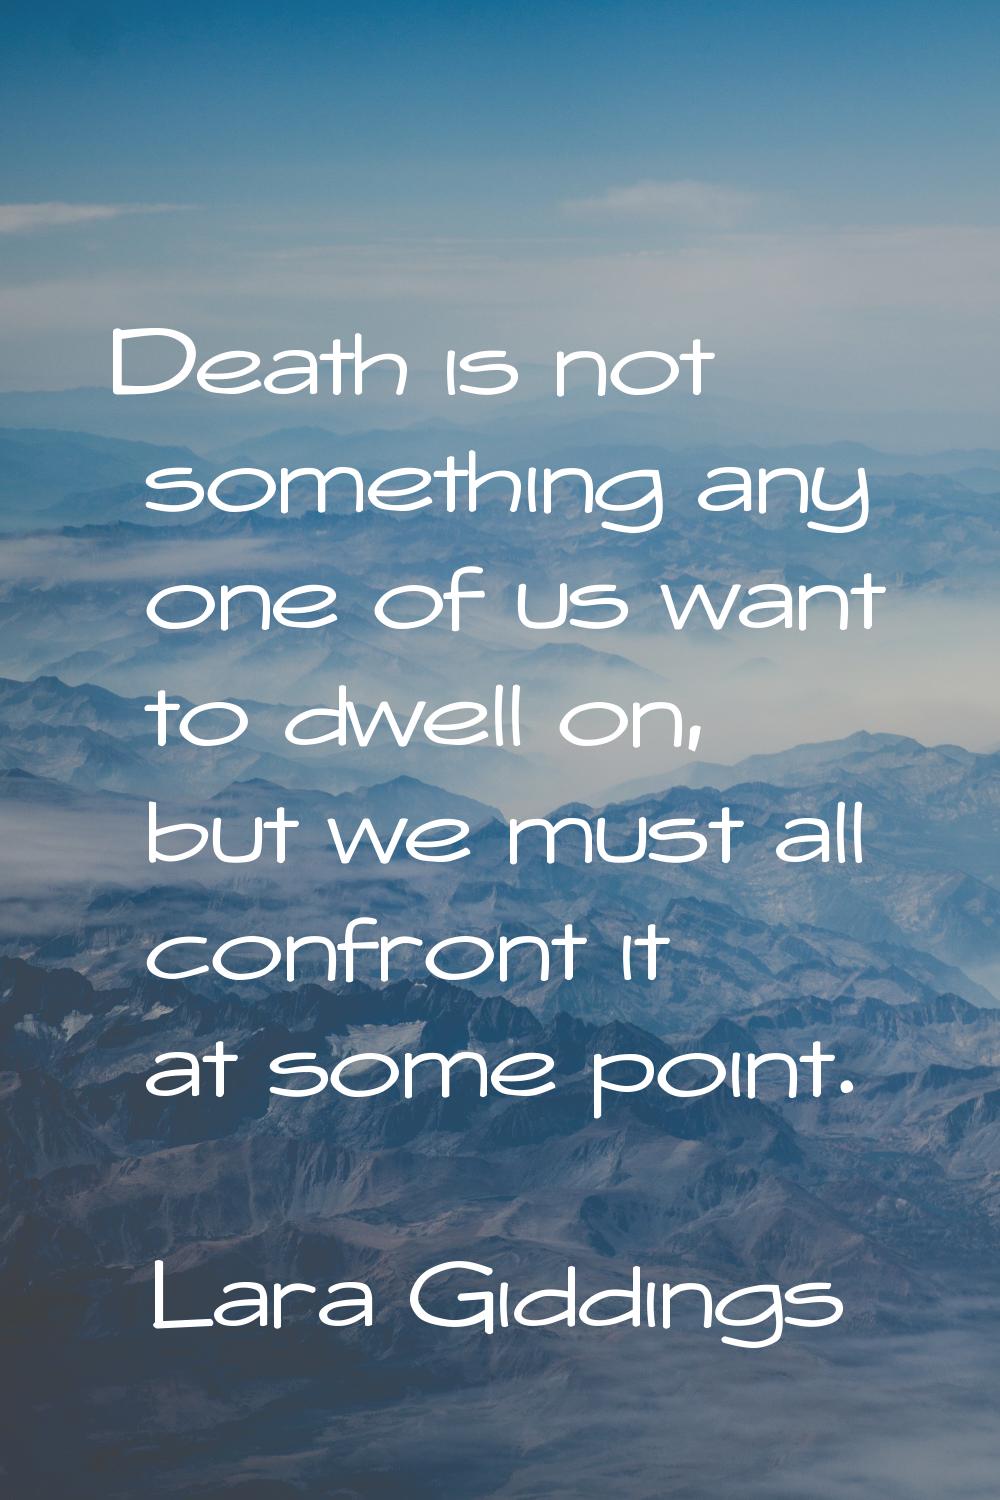 Death is not something any one of us want to dwell on, but we must all confront it at some point.